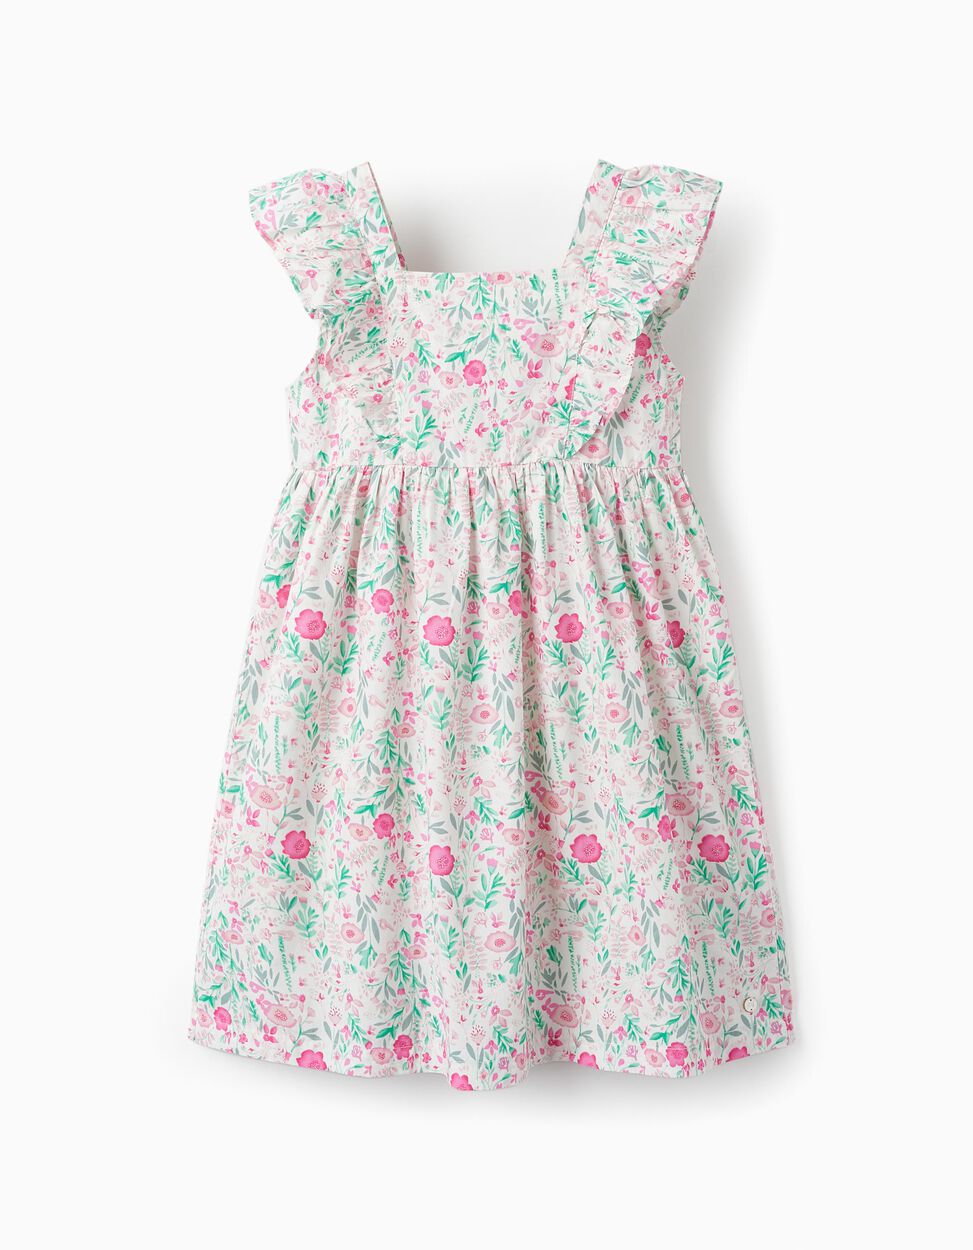 Buy Online Floral Cotton Dress for Girls, White/Pink